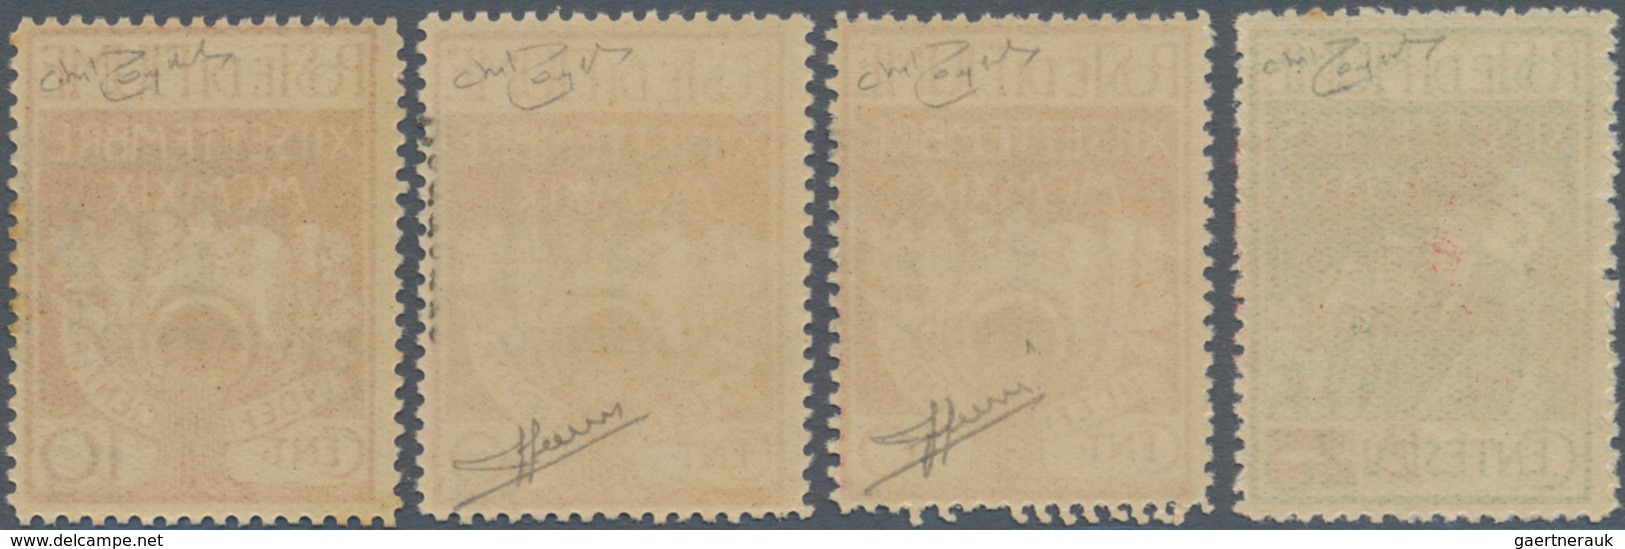 Fiume - Besetzung Der Carnaro-Inseln: 1920. Four Examples With Double Overprint "Reggenza Italiana D - Fiume